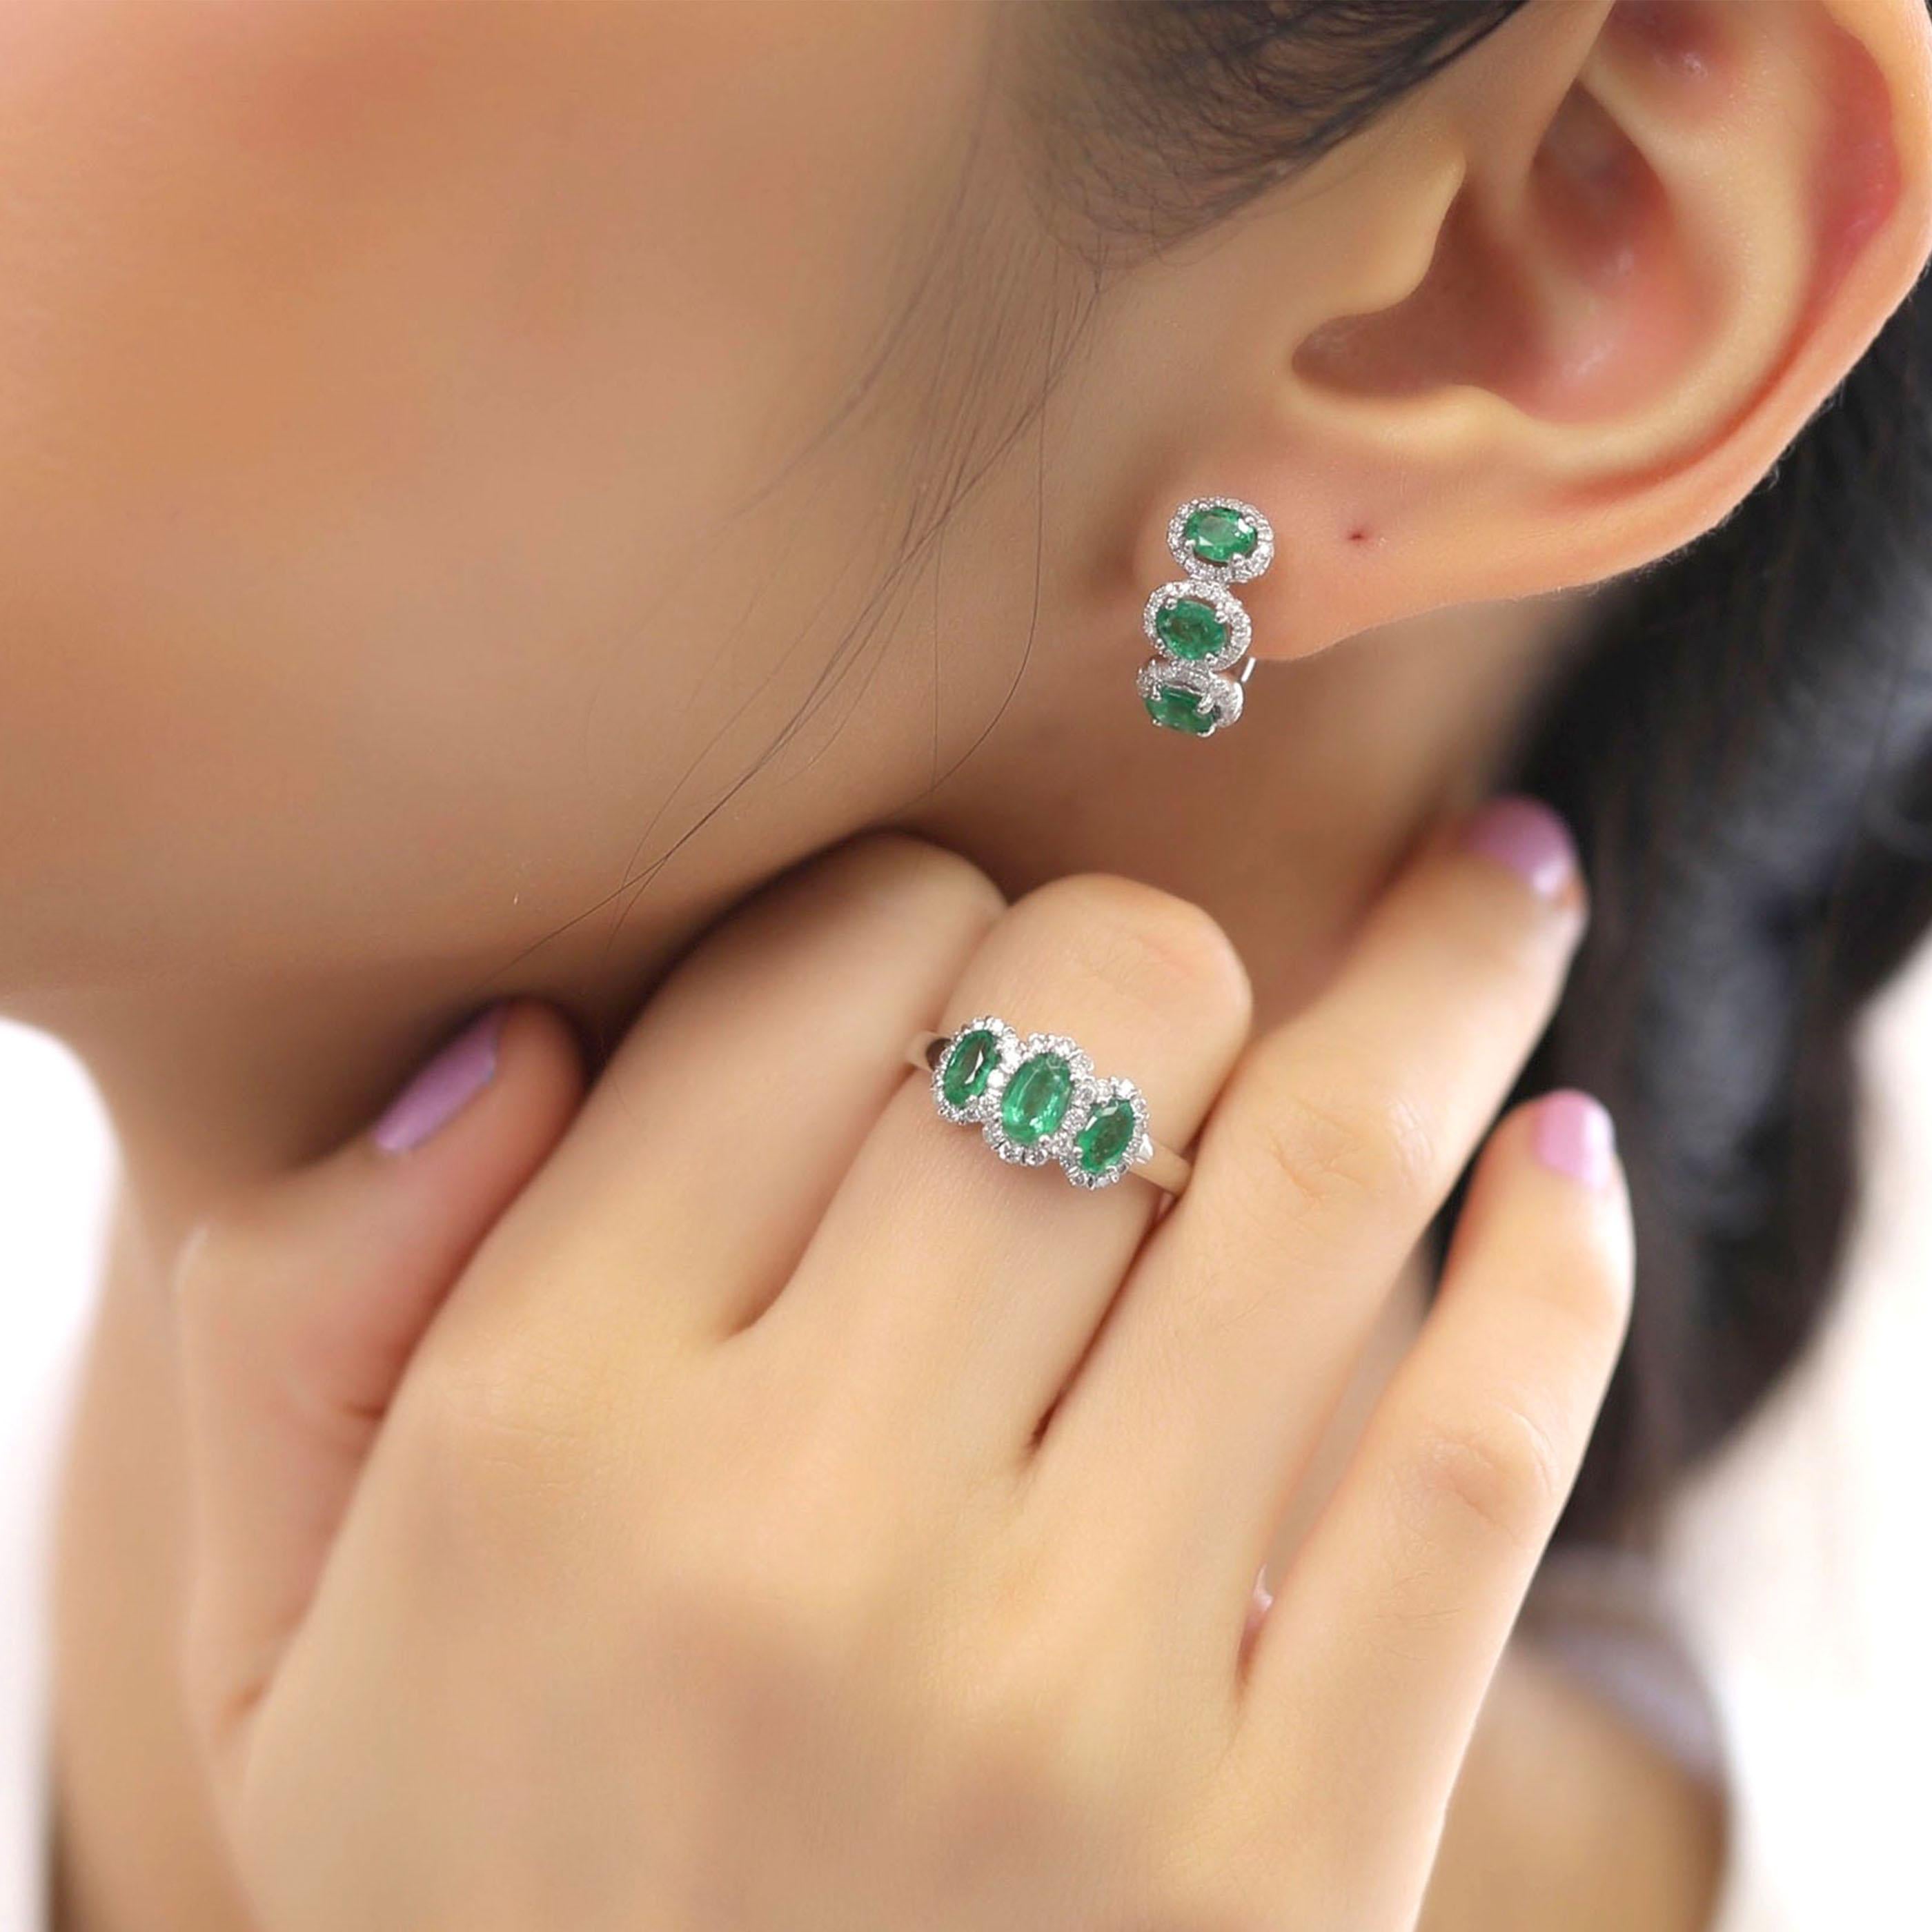 This emerald huggy earring and ring set is crafted in 18-karat white gold, weighing approximately 0.60 total carats of SI-H Quality white diamonds and 2.08 total carats of emerald stones. The ring is comfortable and can be sized 